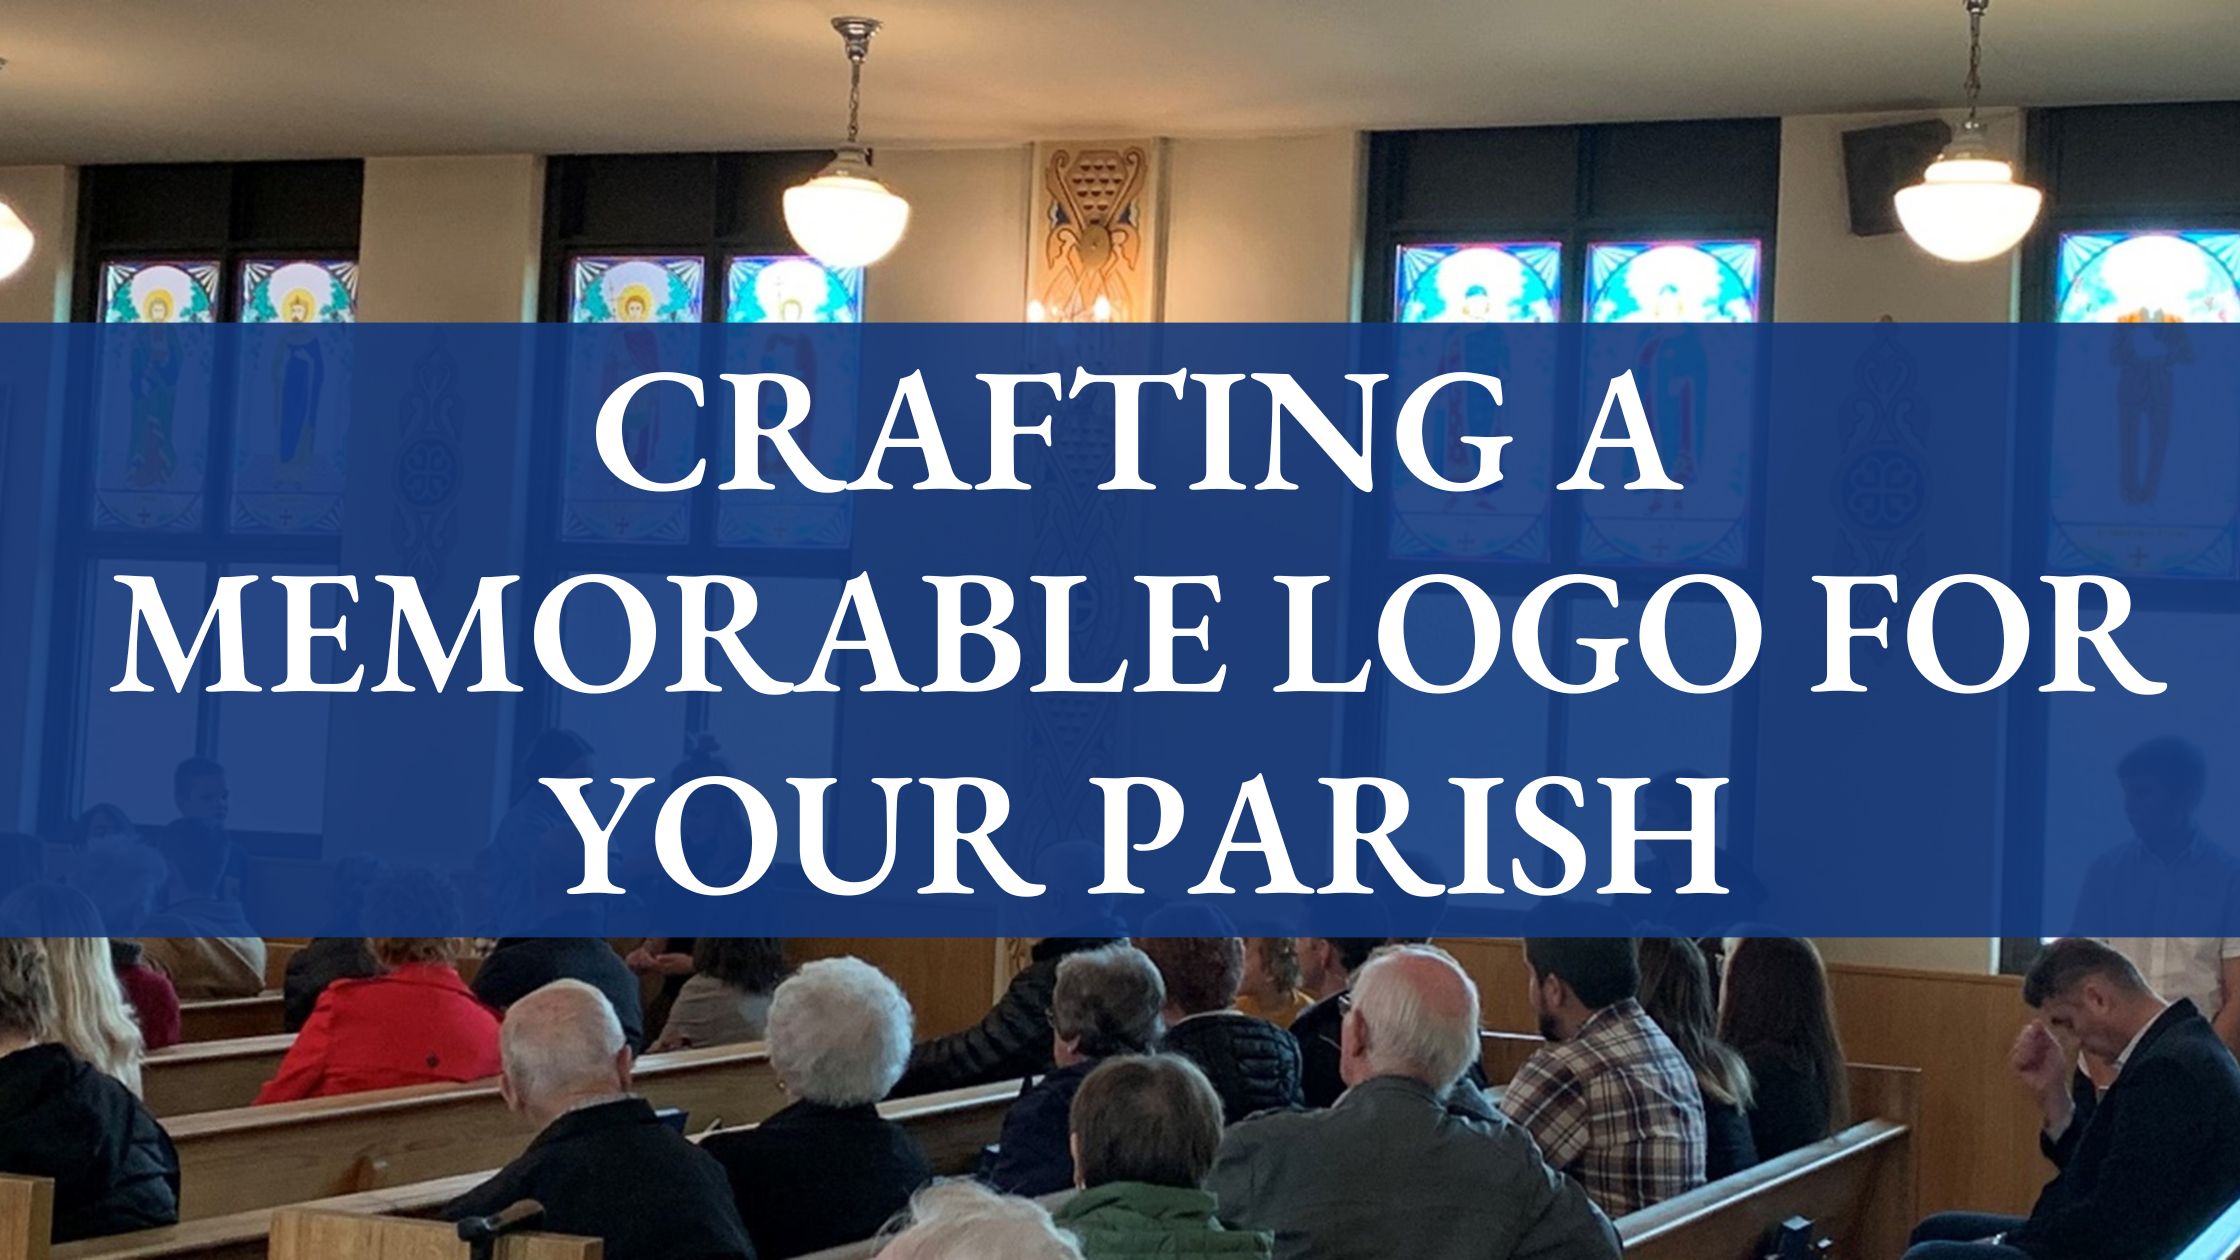 Crafting a Memorable Logo for Your Parish